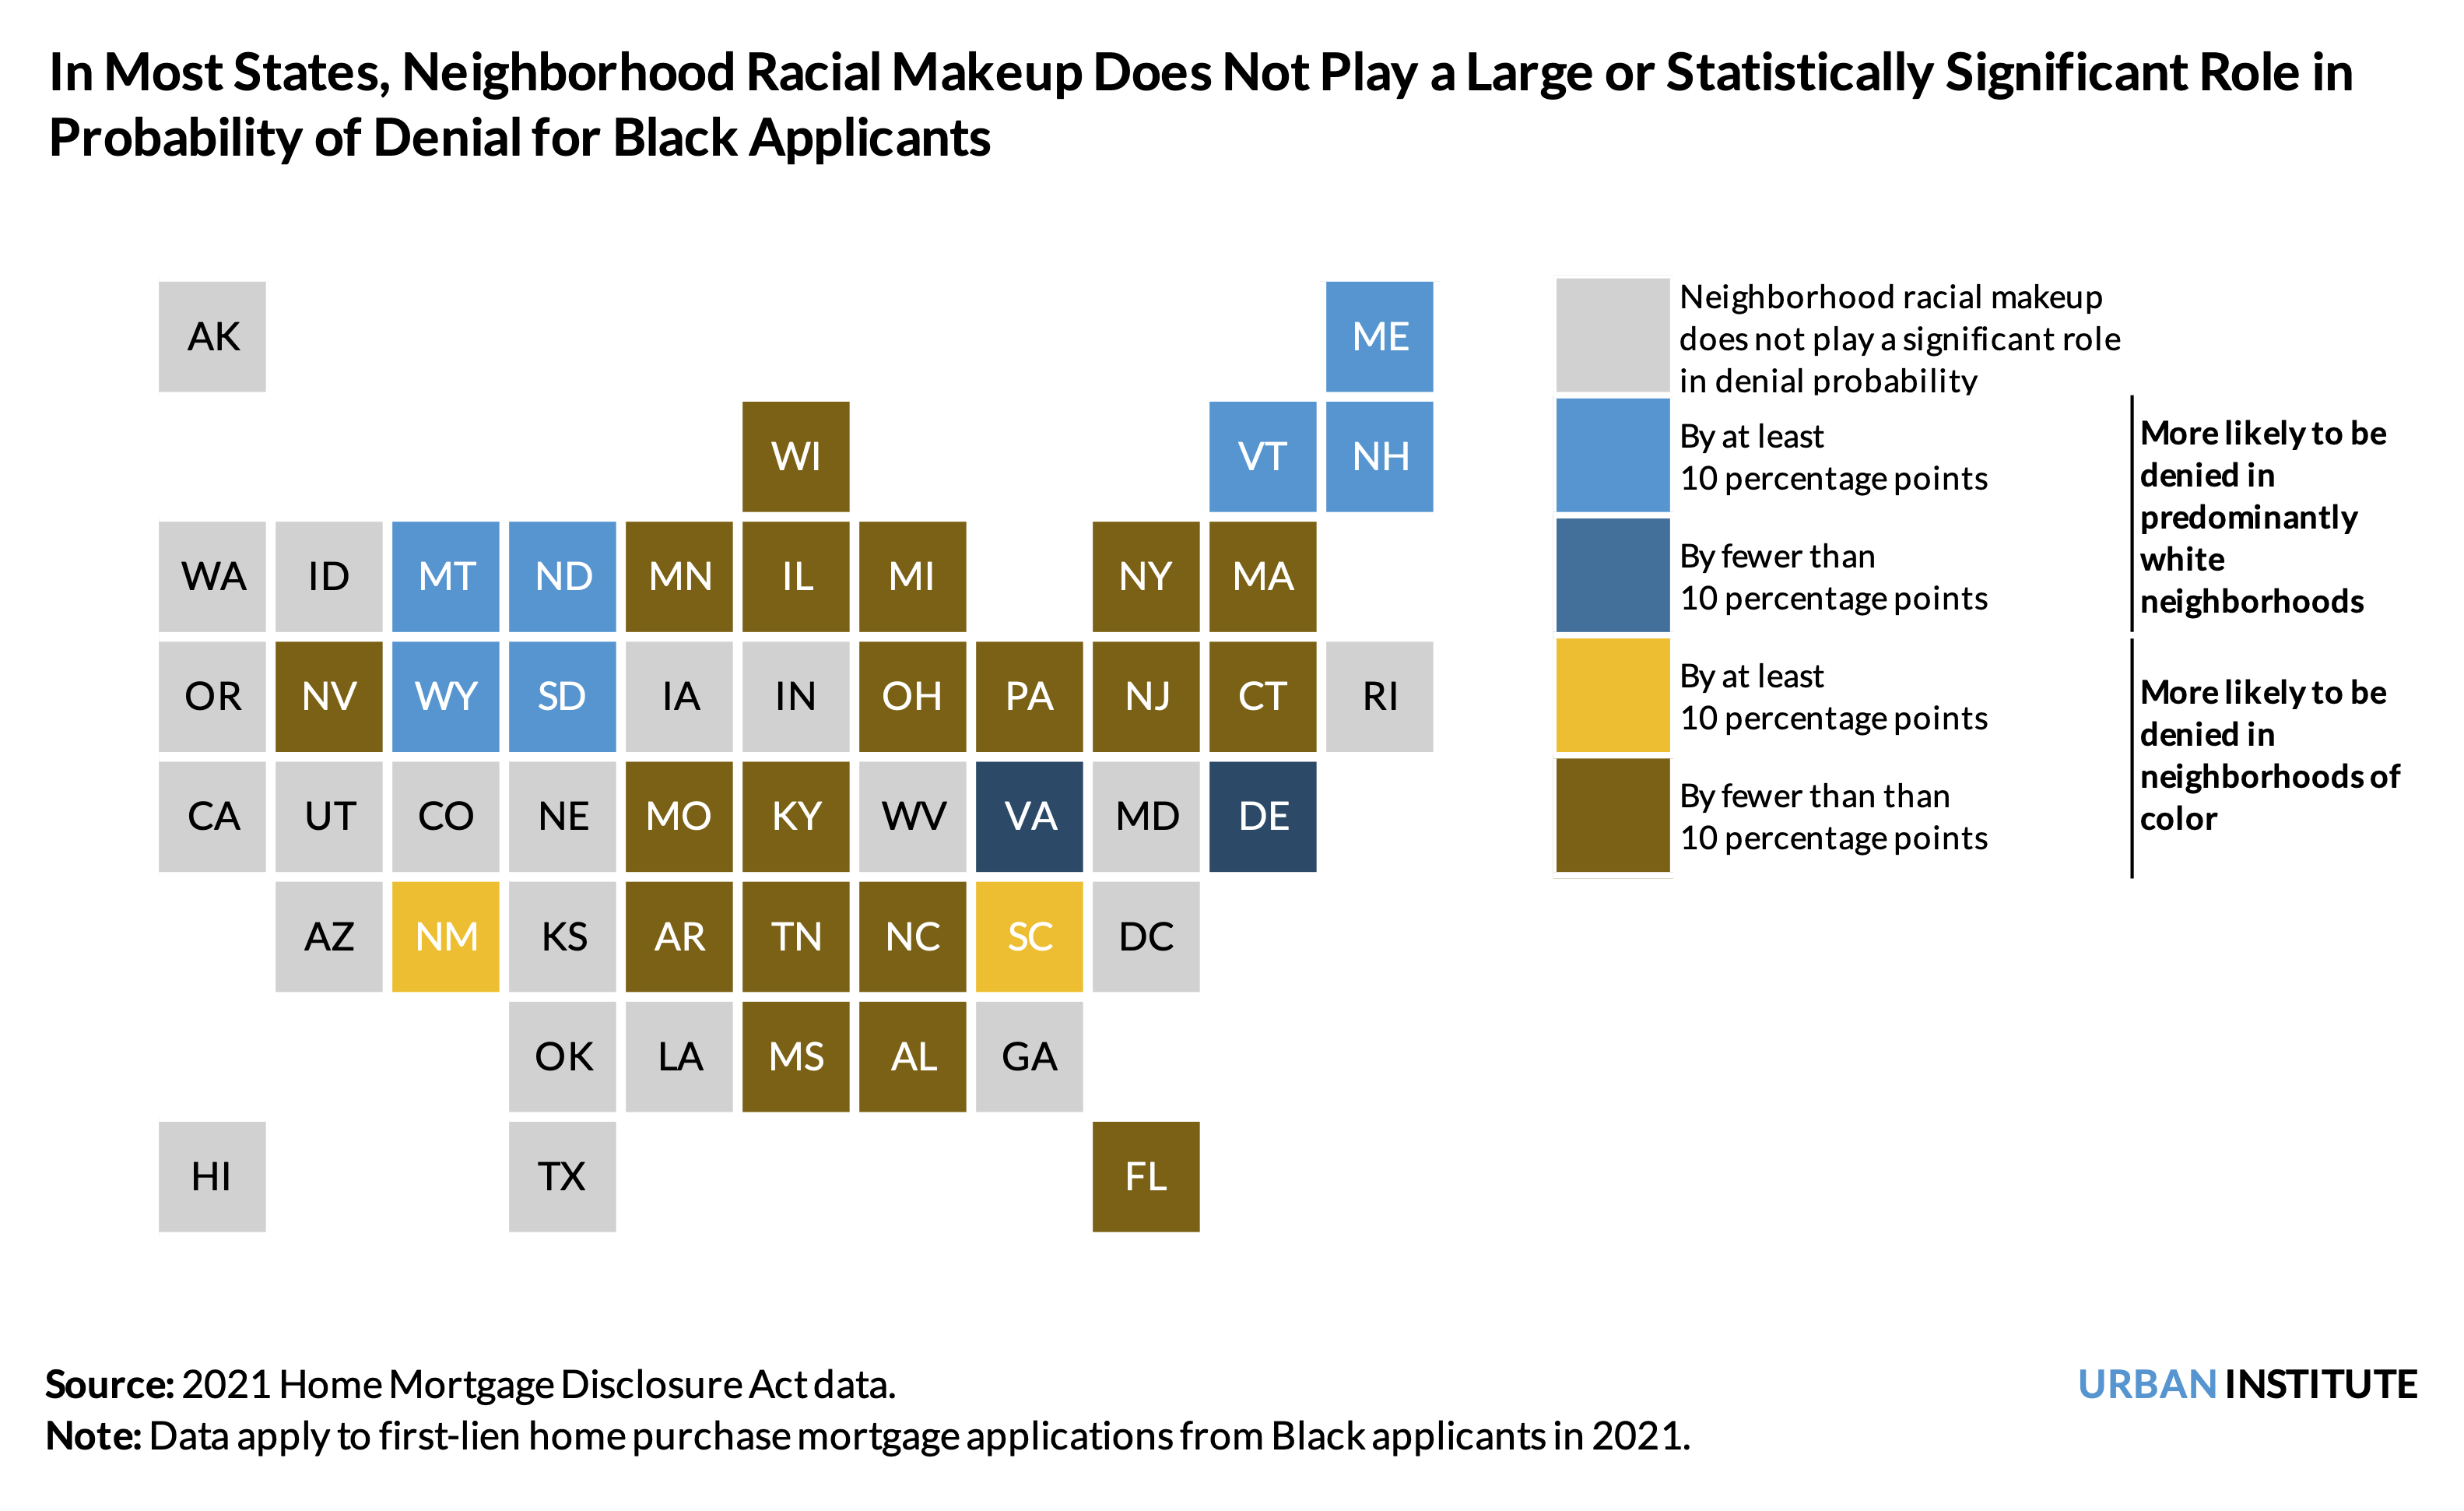 Map of the US showing that in most states, neighborhood racial makeup does not play a large or statistically significant role in probability of denial for Black applicants